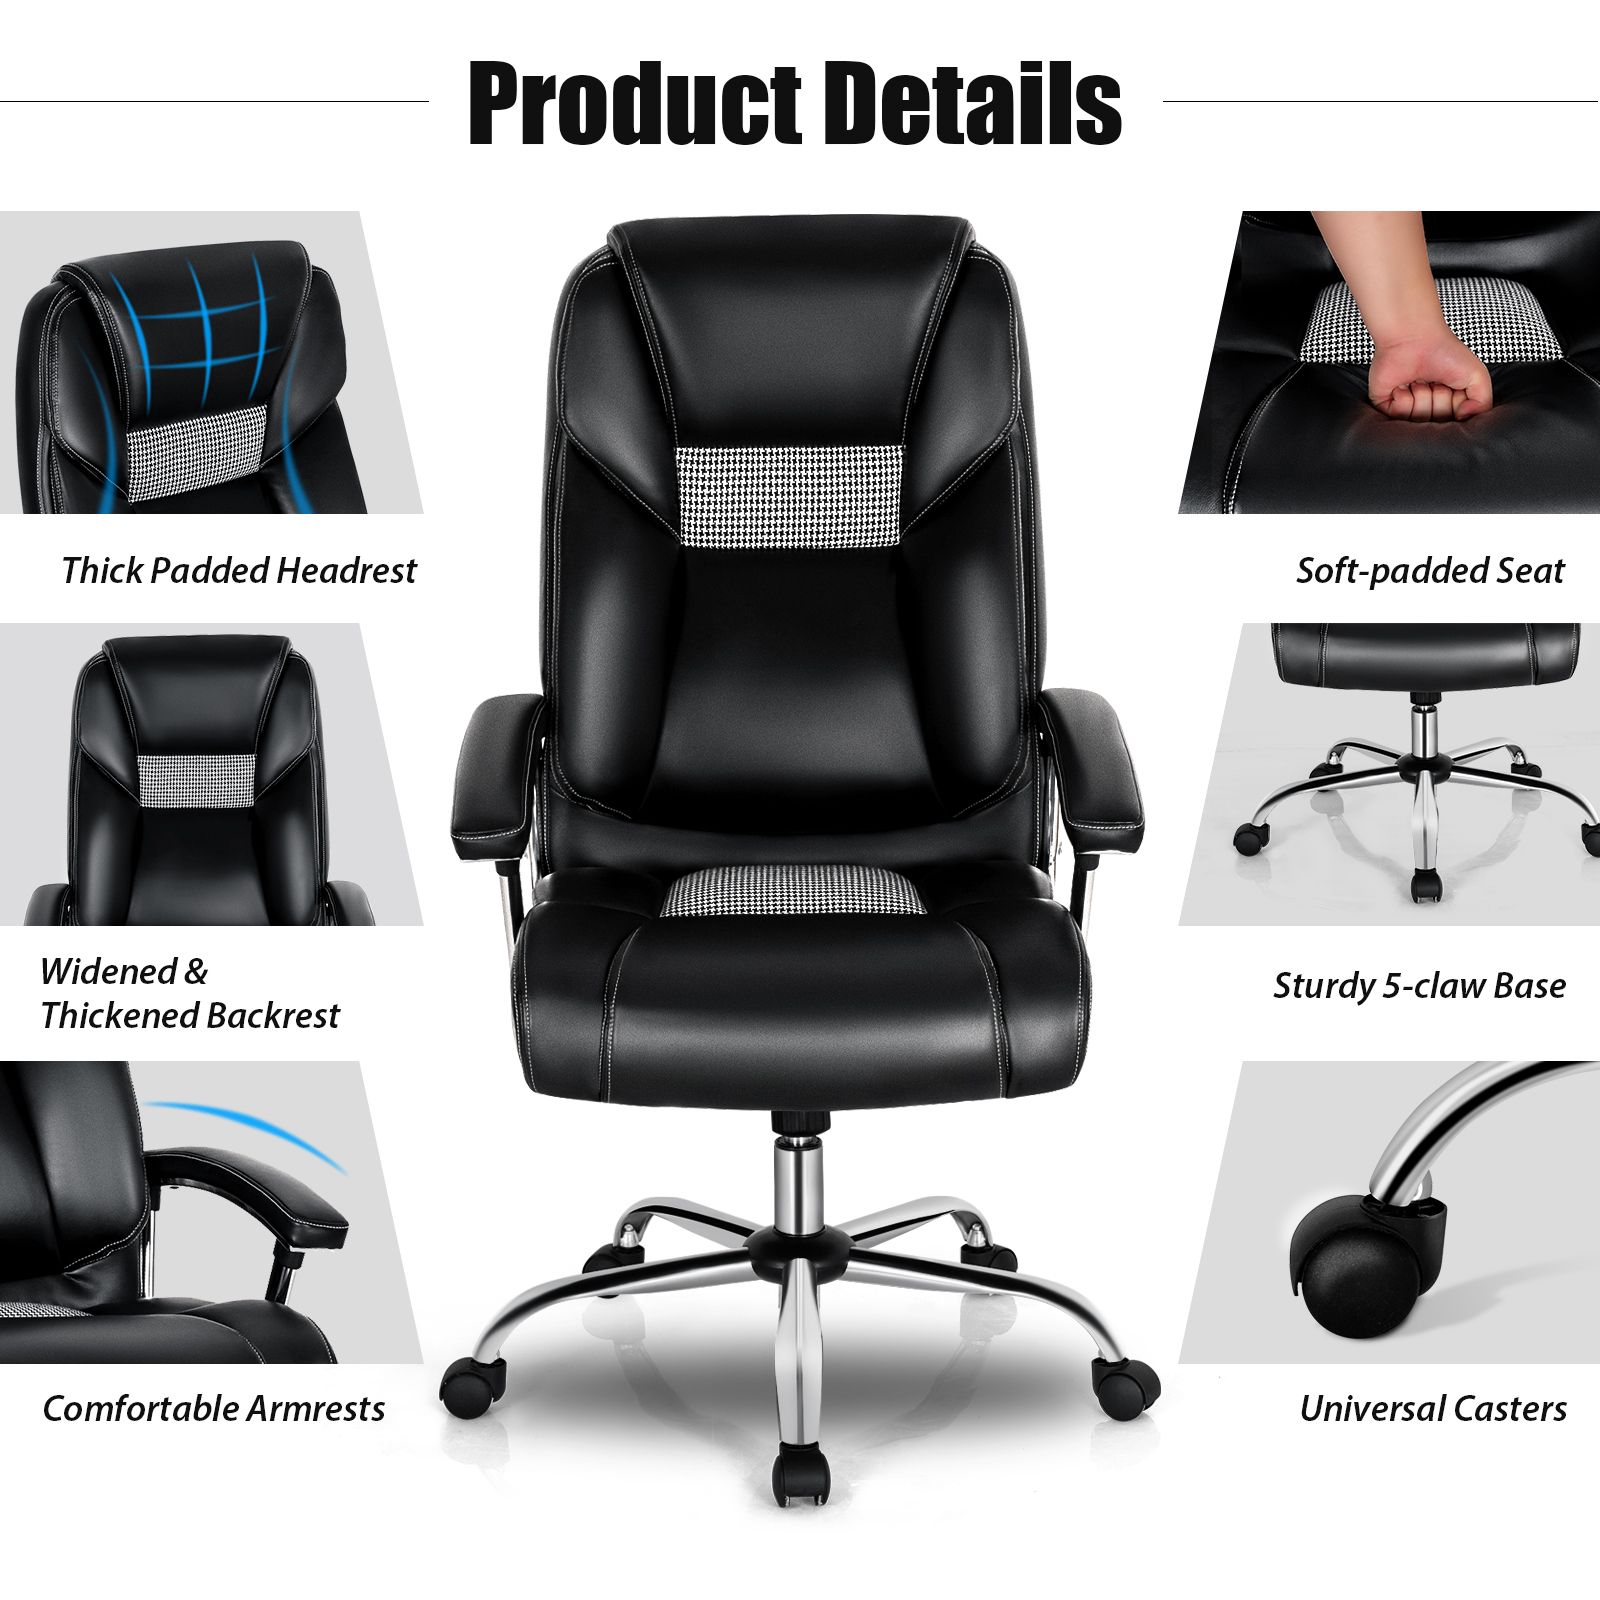 PVC Leather High-back Executive Chair with Padded Armrests